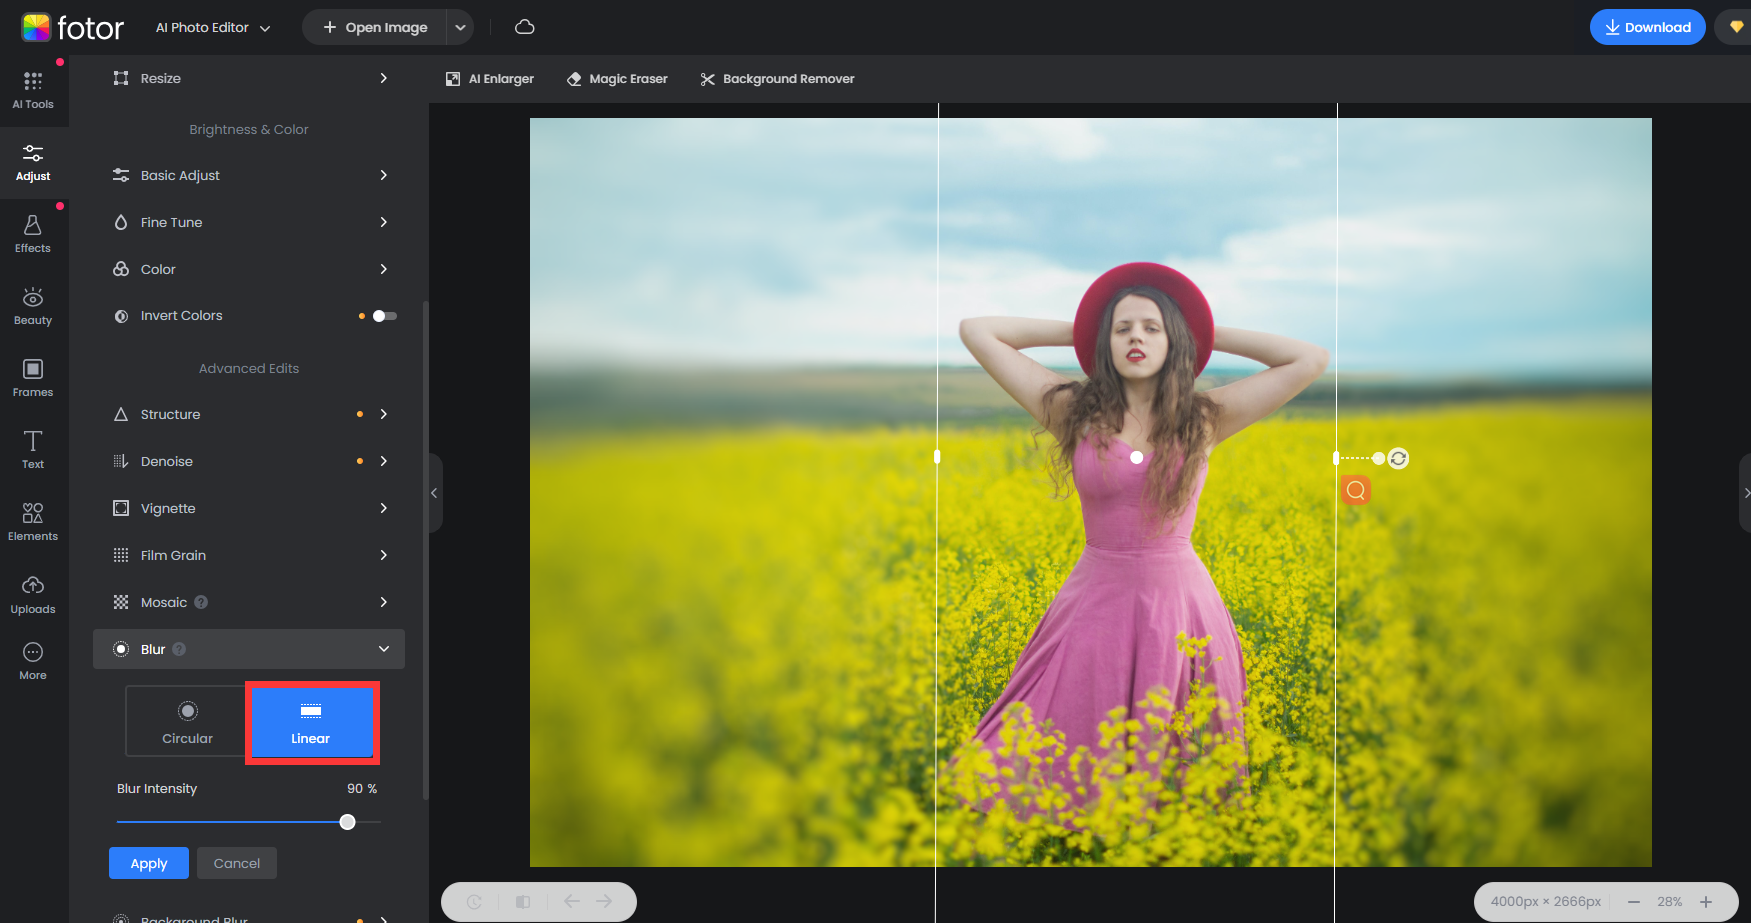 blur imgae background with linear blur tool